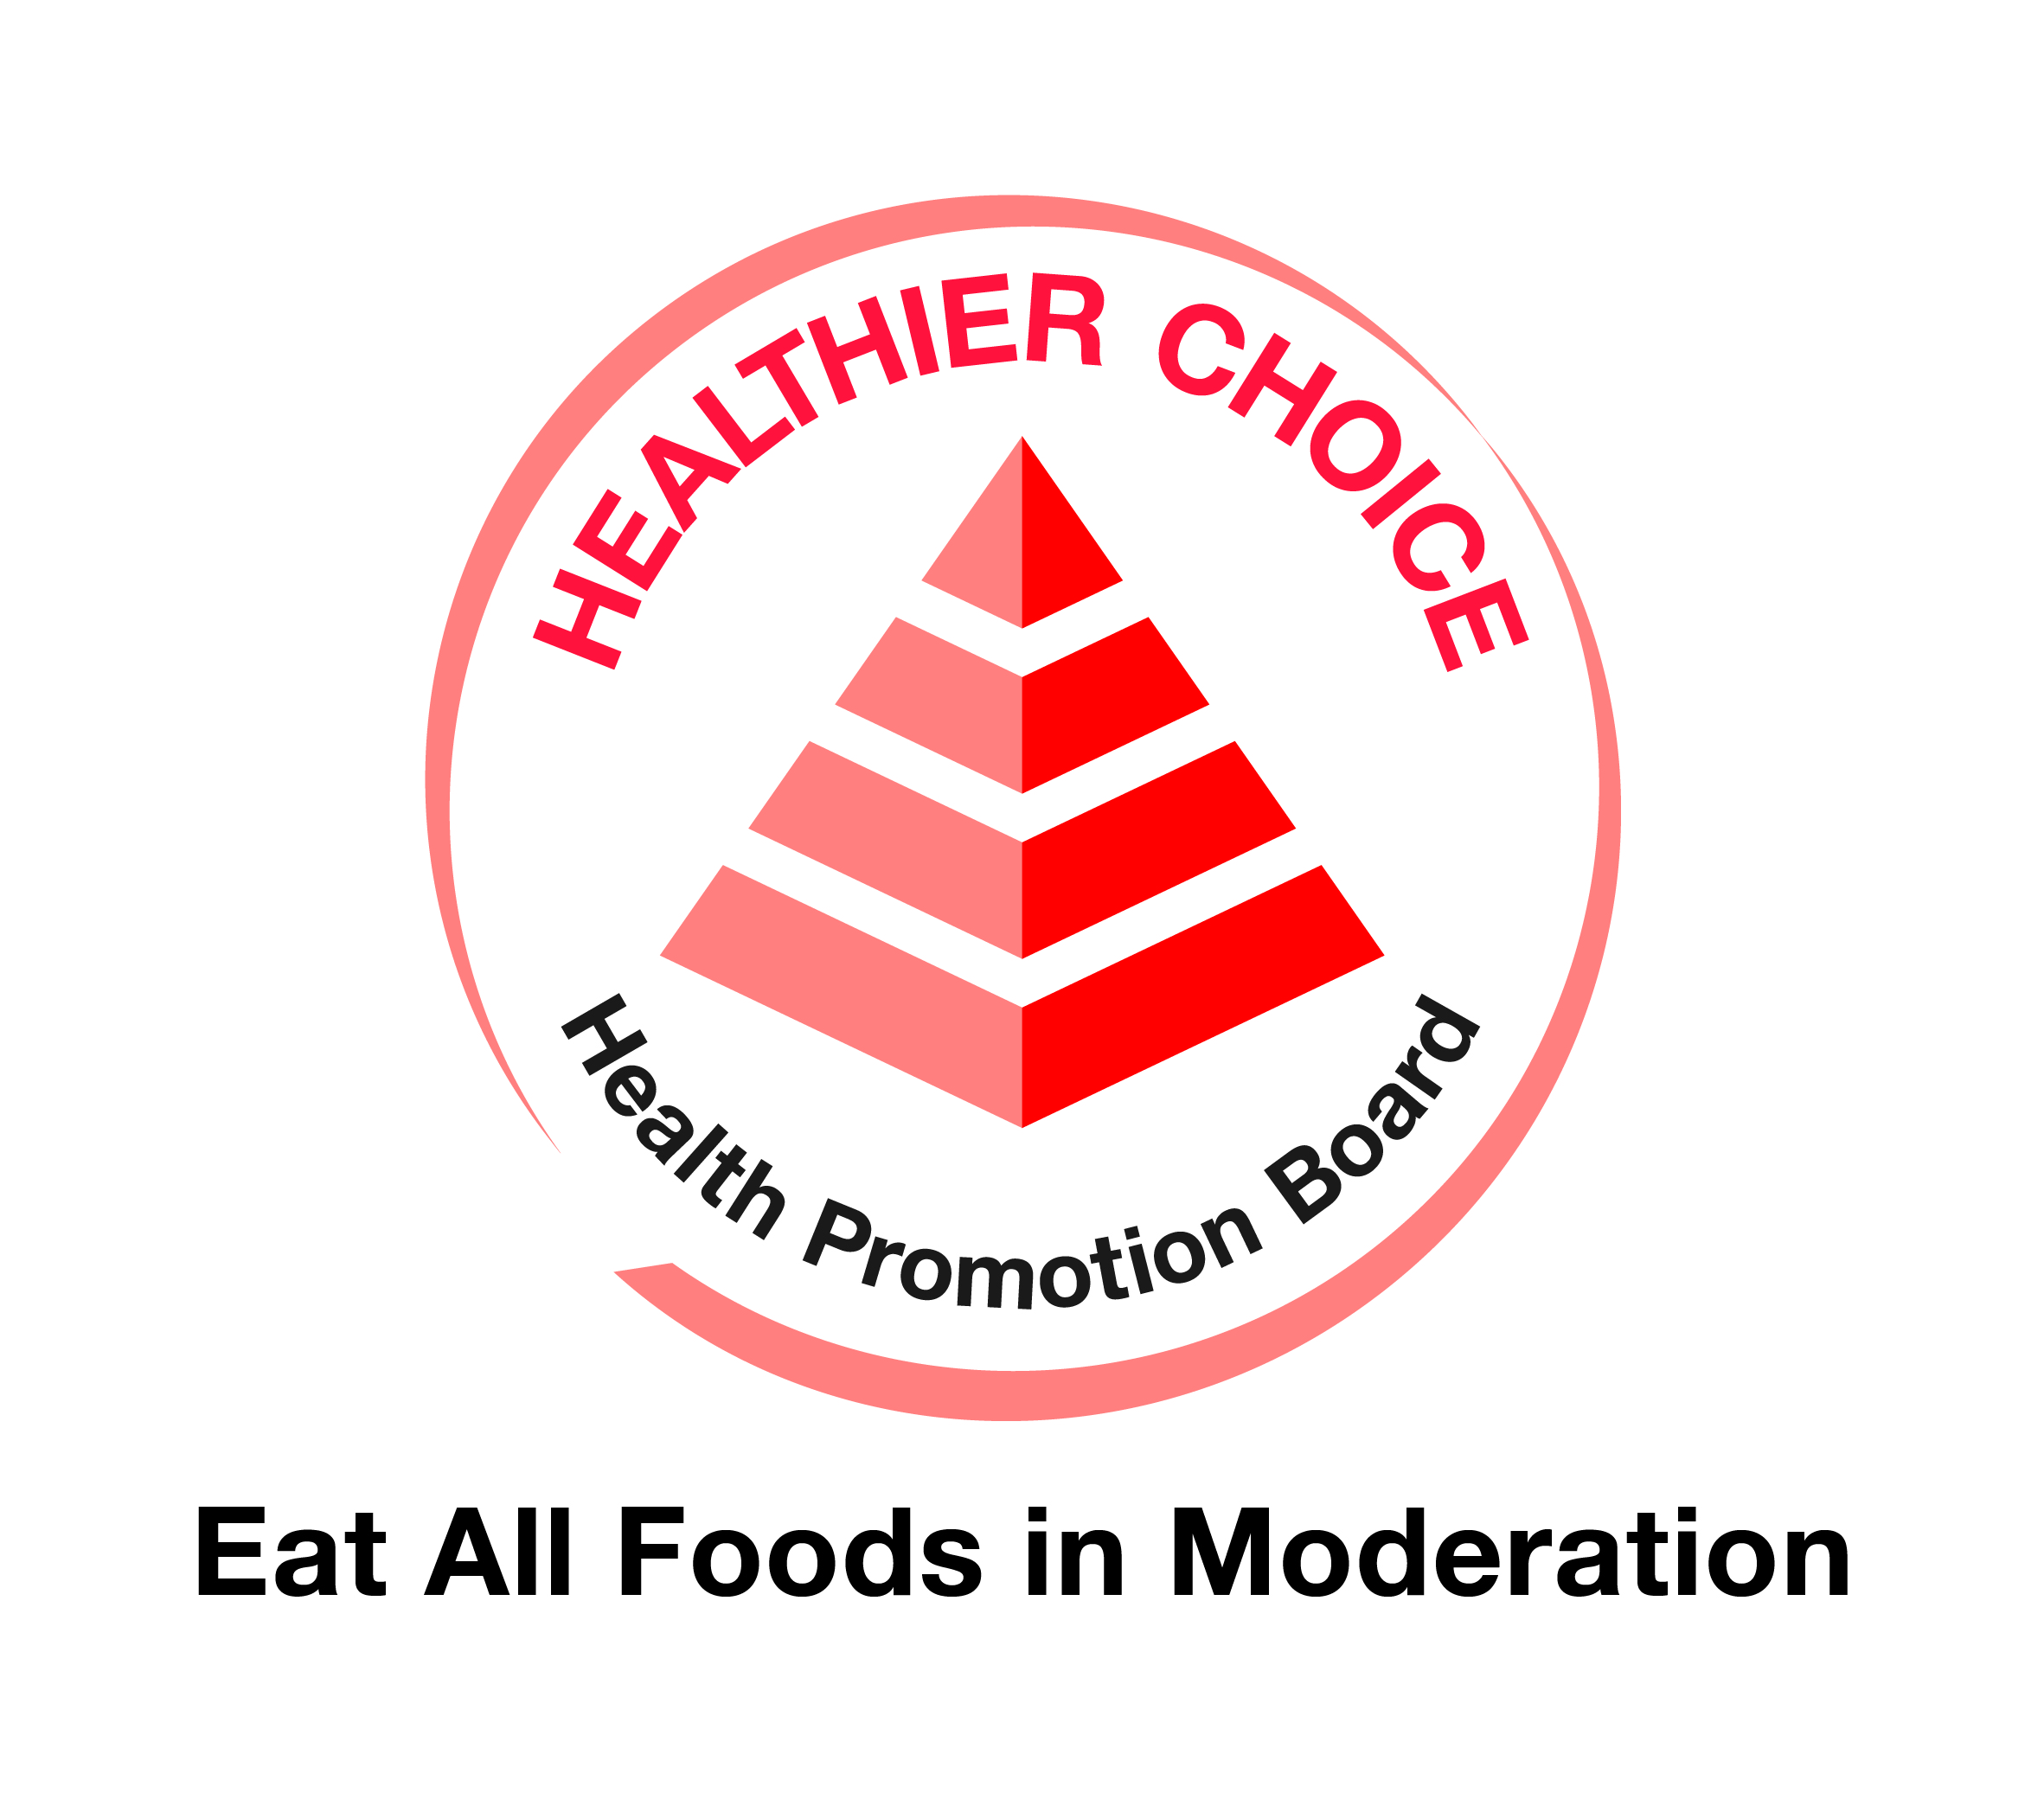 Teach your child to make healthy food choices like using the Healthier Choice Symbol when grocery shopping.